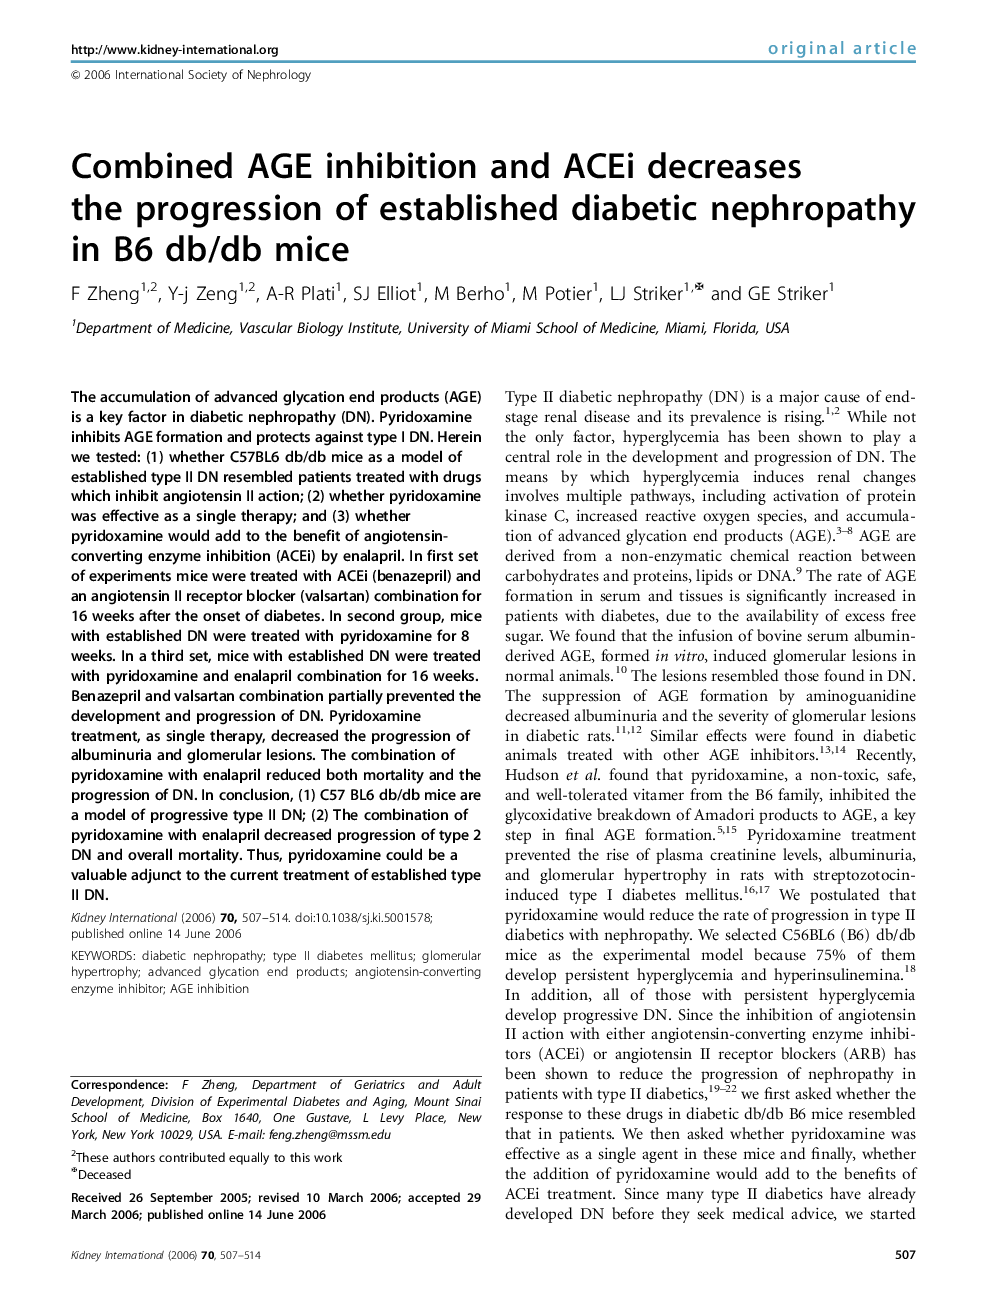 Combined AGE inhibition and ACEi decreases the progression of established diabetic nephropathy in B6 db/db mice